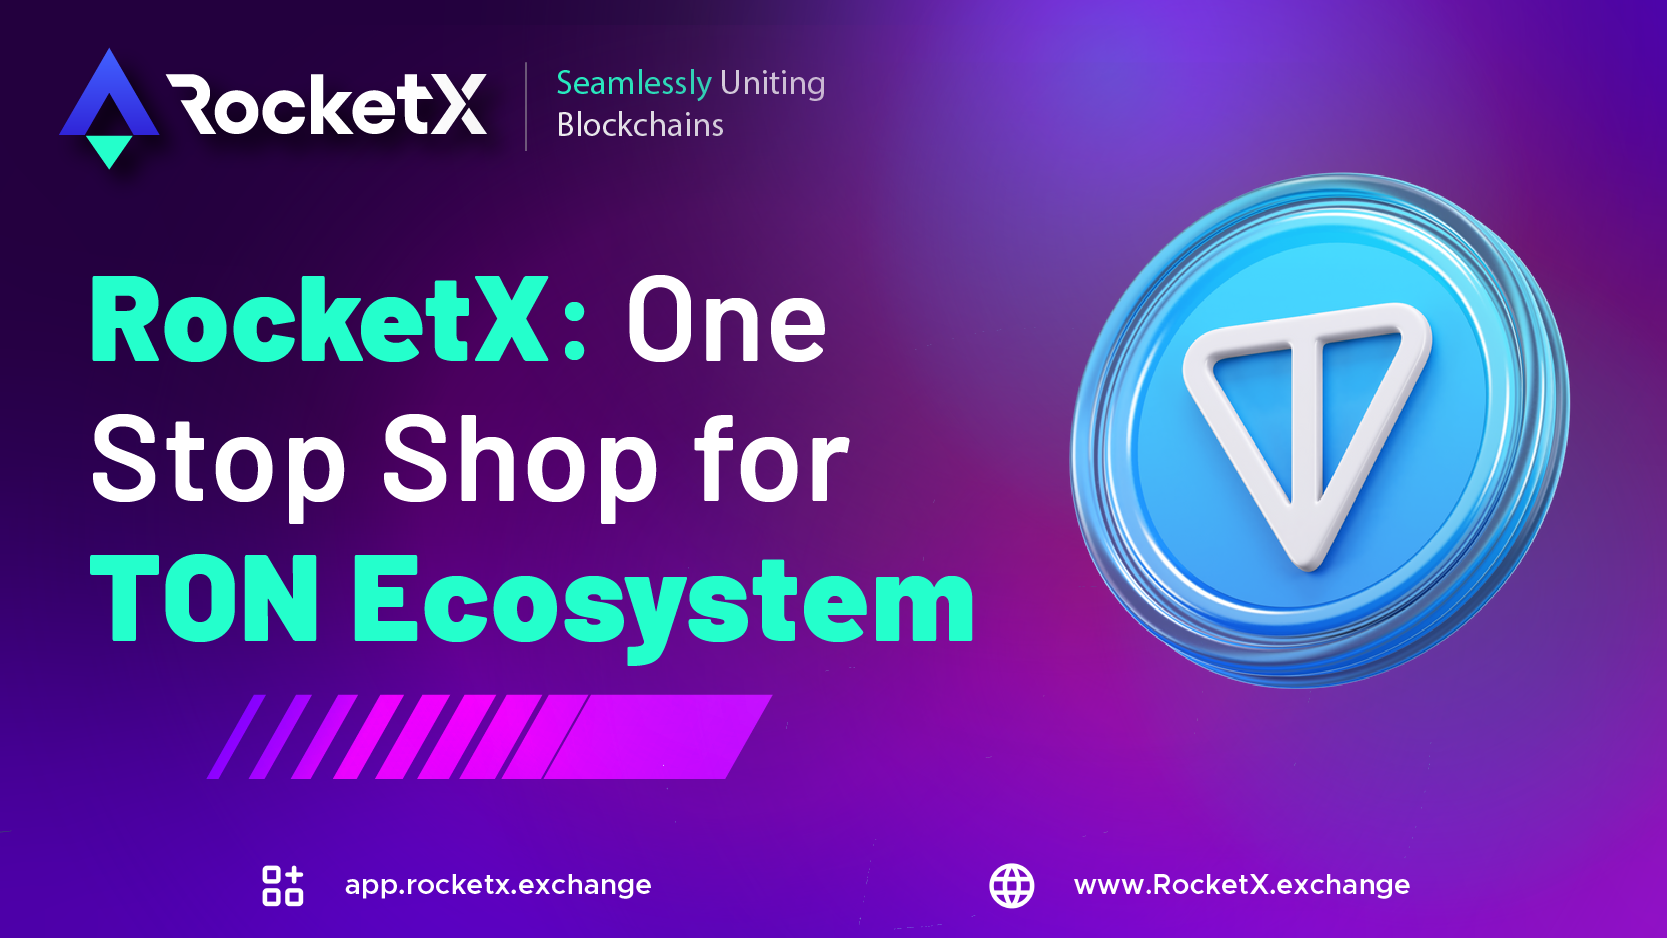 RocketX promotional image featuring a Toncoin logo on a purple background with the text: 'RocketX: One Stop Shop for TON Ecosystem.